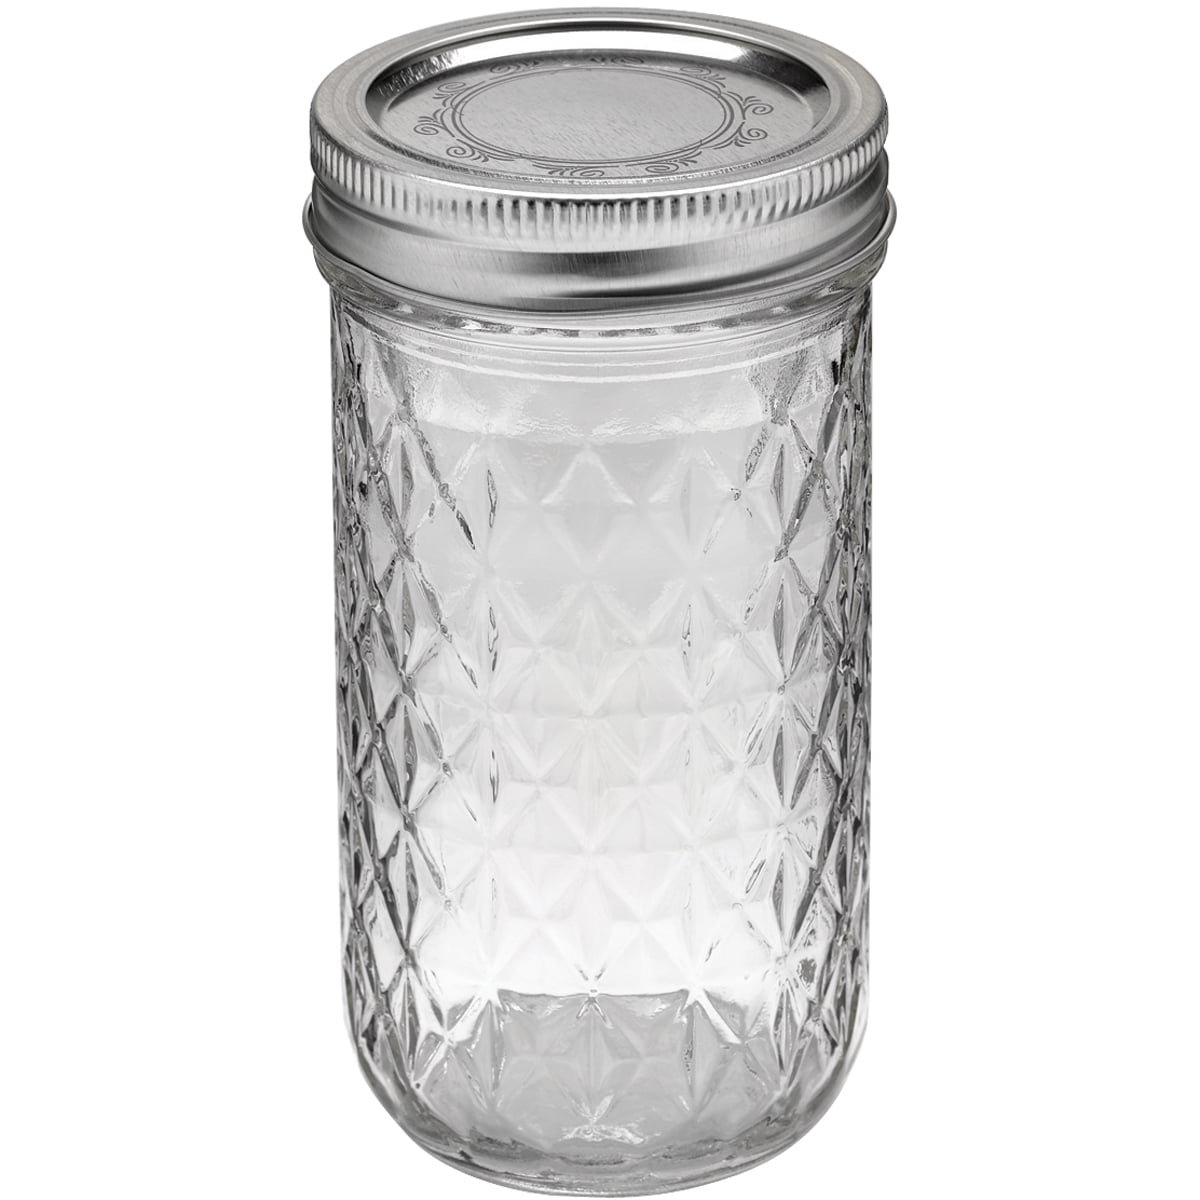 Quilted Crystal Style Regular Mouth-One Jar Ball Mason Jar Jelly Jars 12 oz